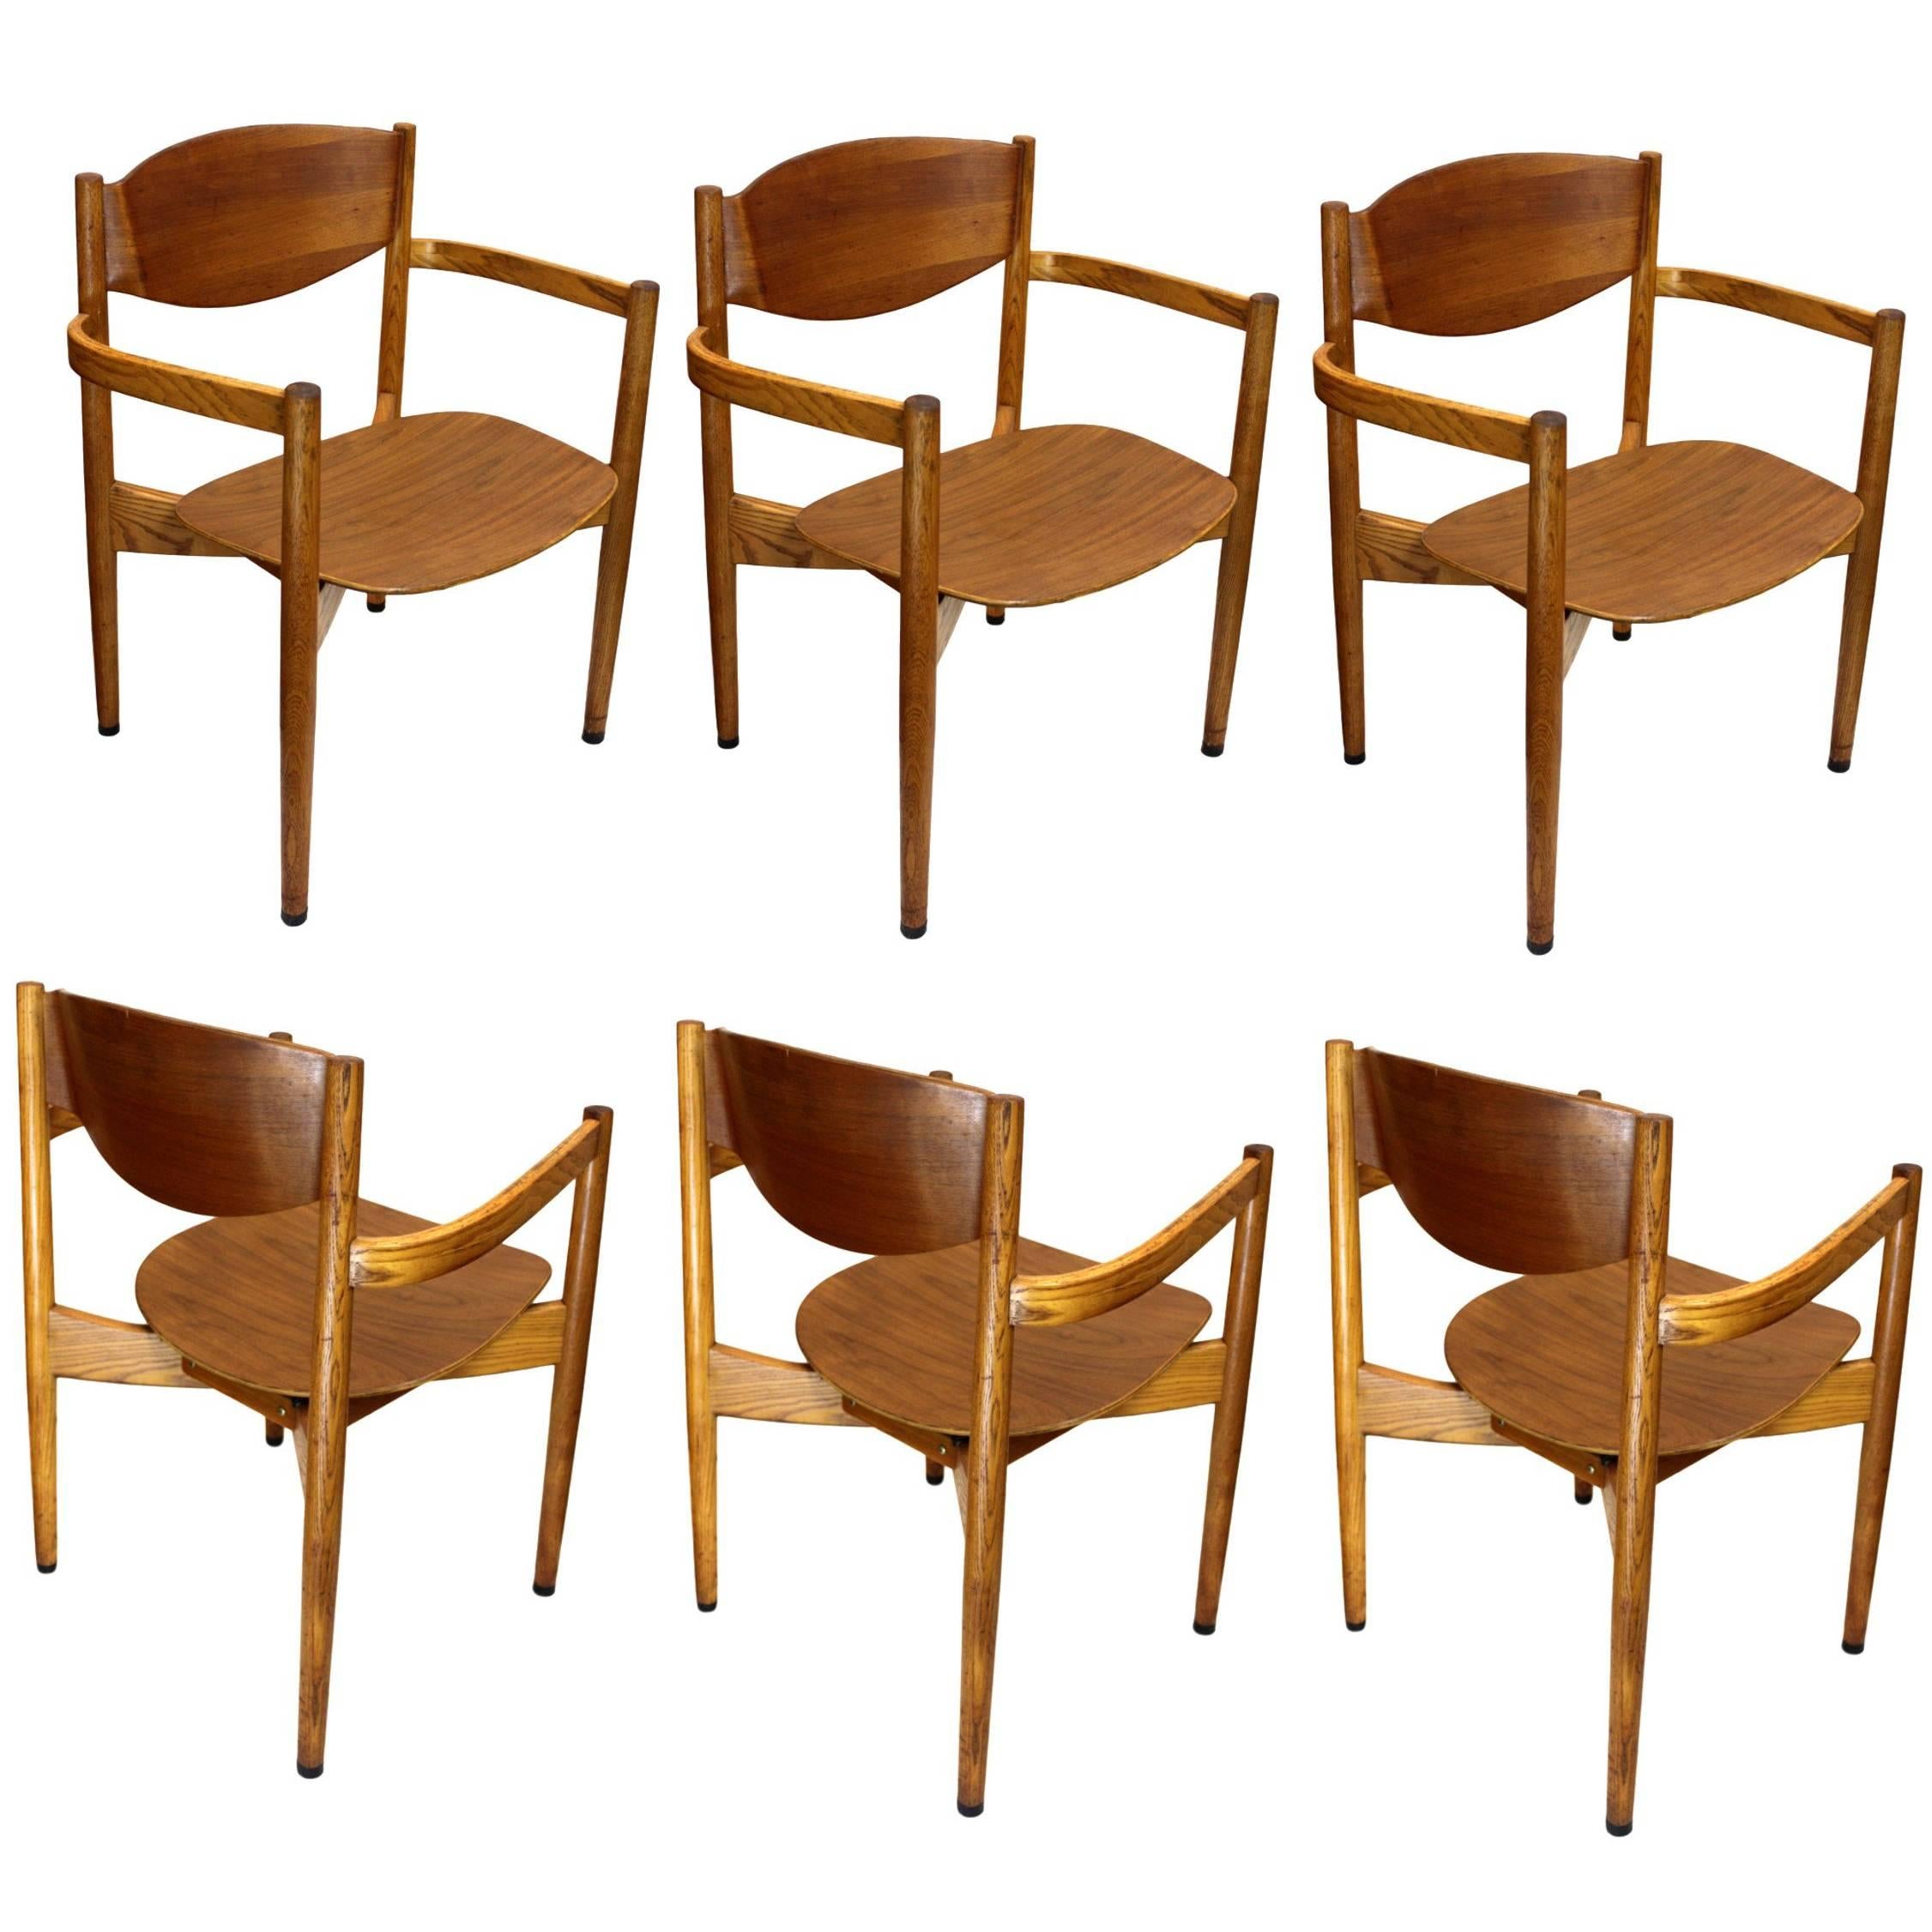 Set of Six Vintage Mid-Century Modern Stacking Chairs by Jens Risom